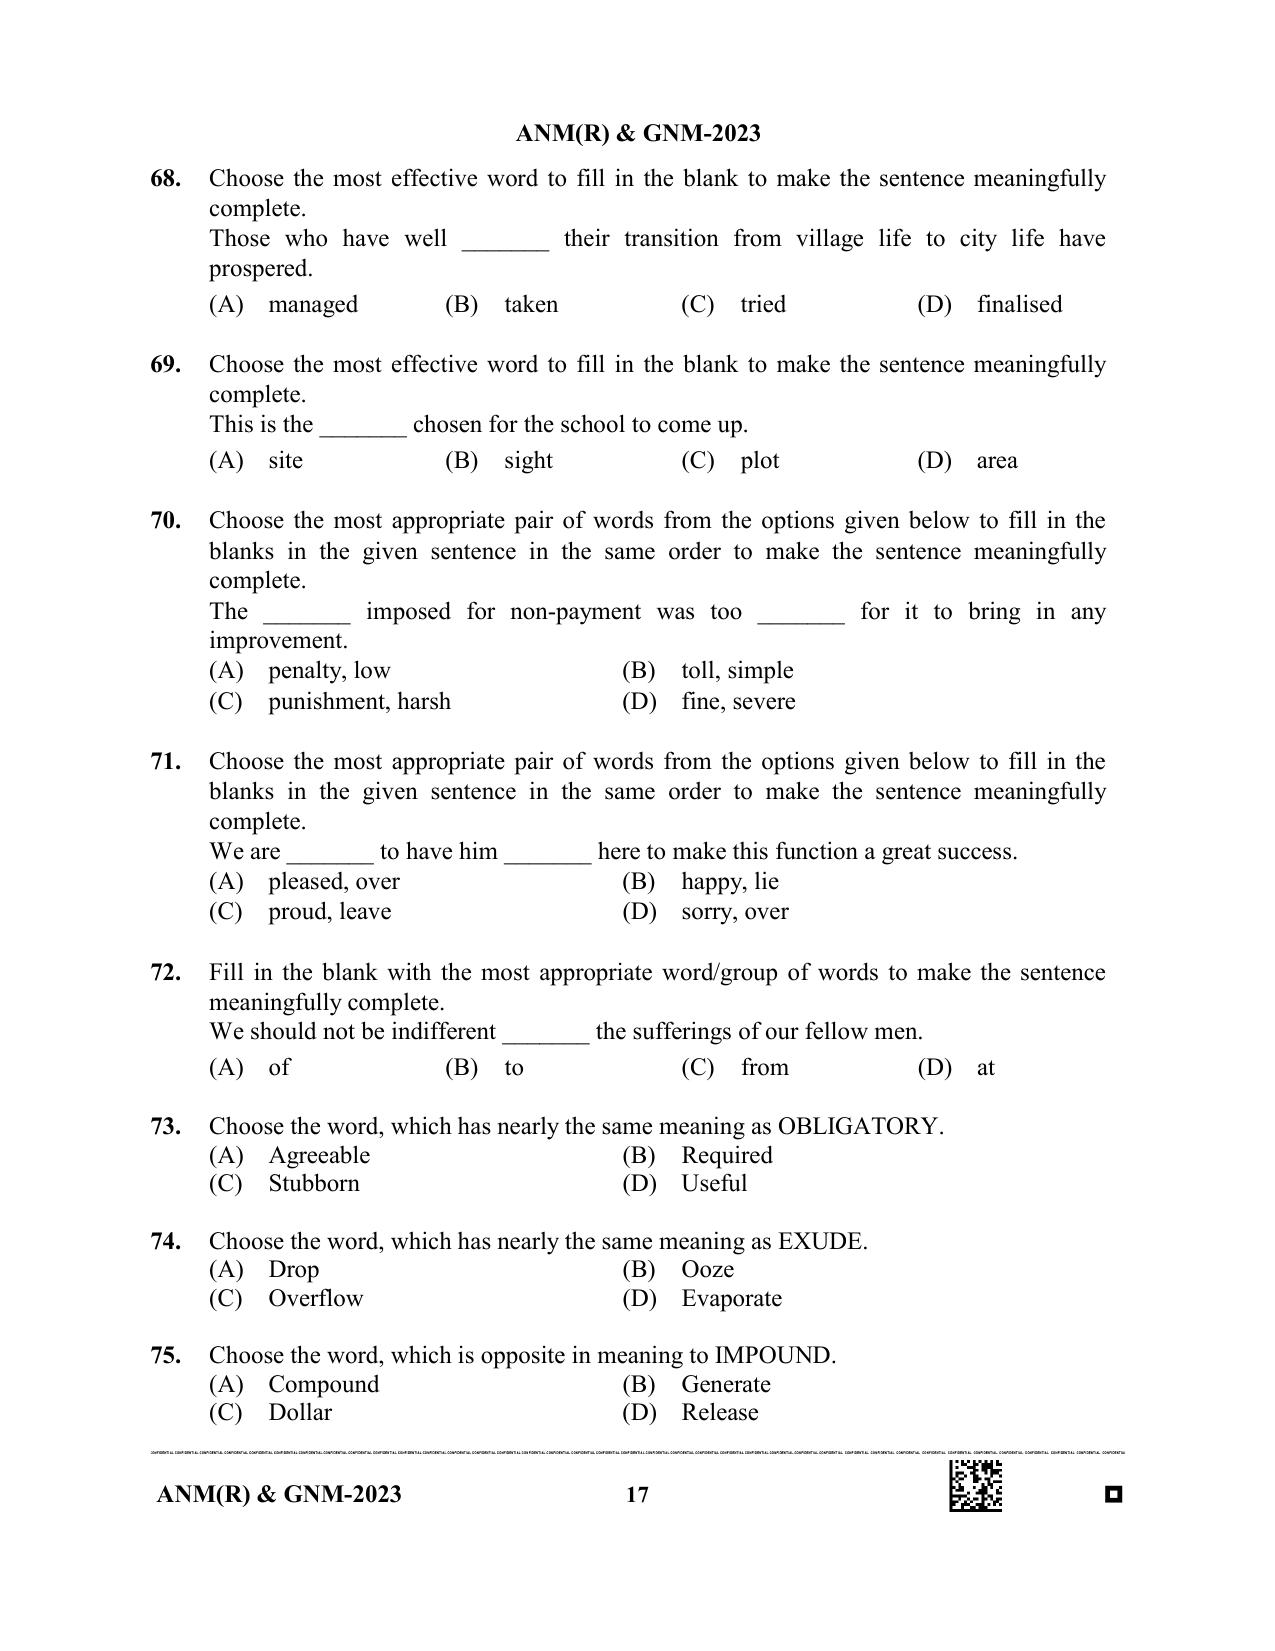 WB ANM GNM 2023 Question Paper - Page 17